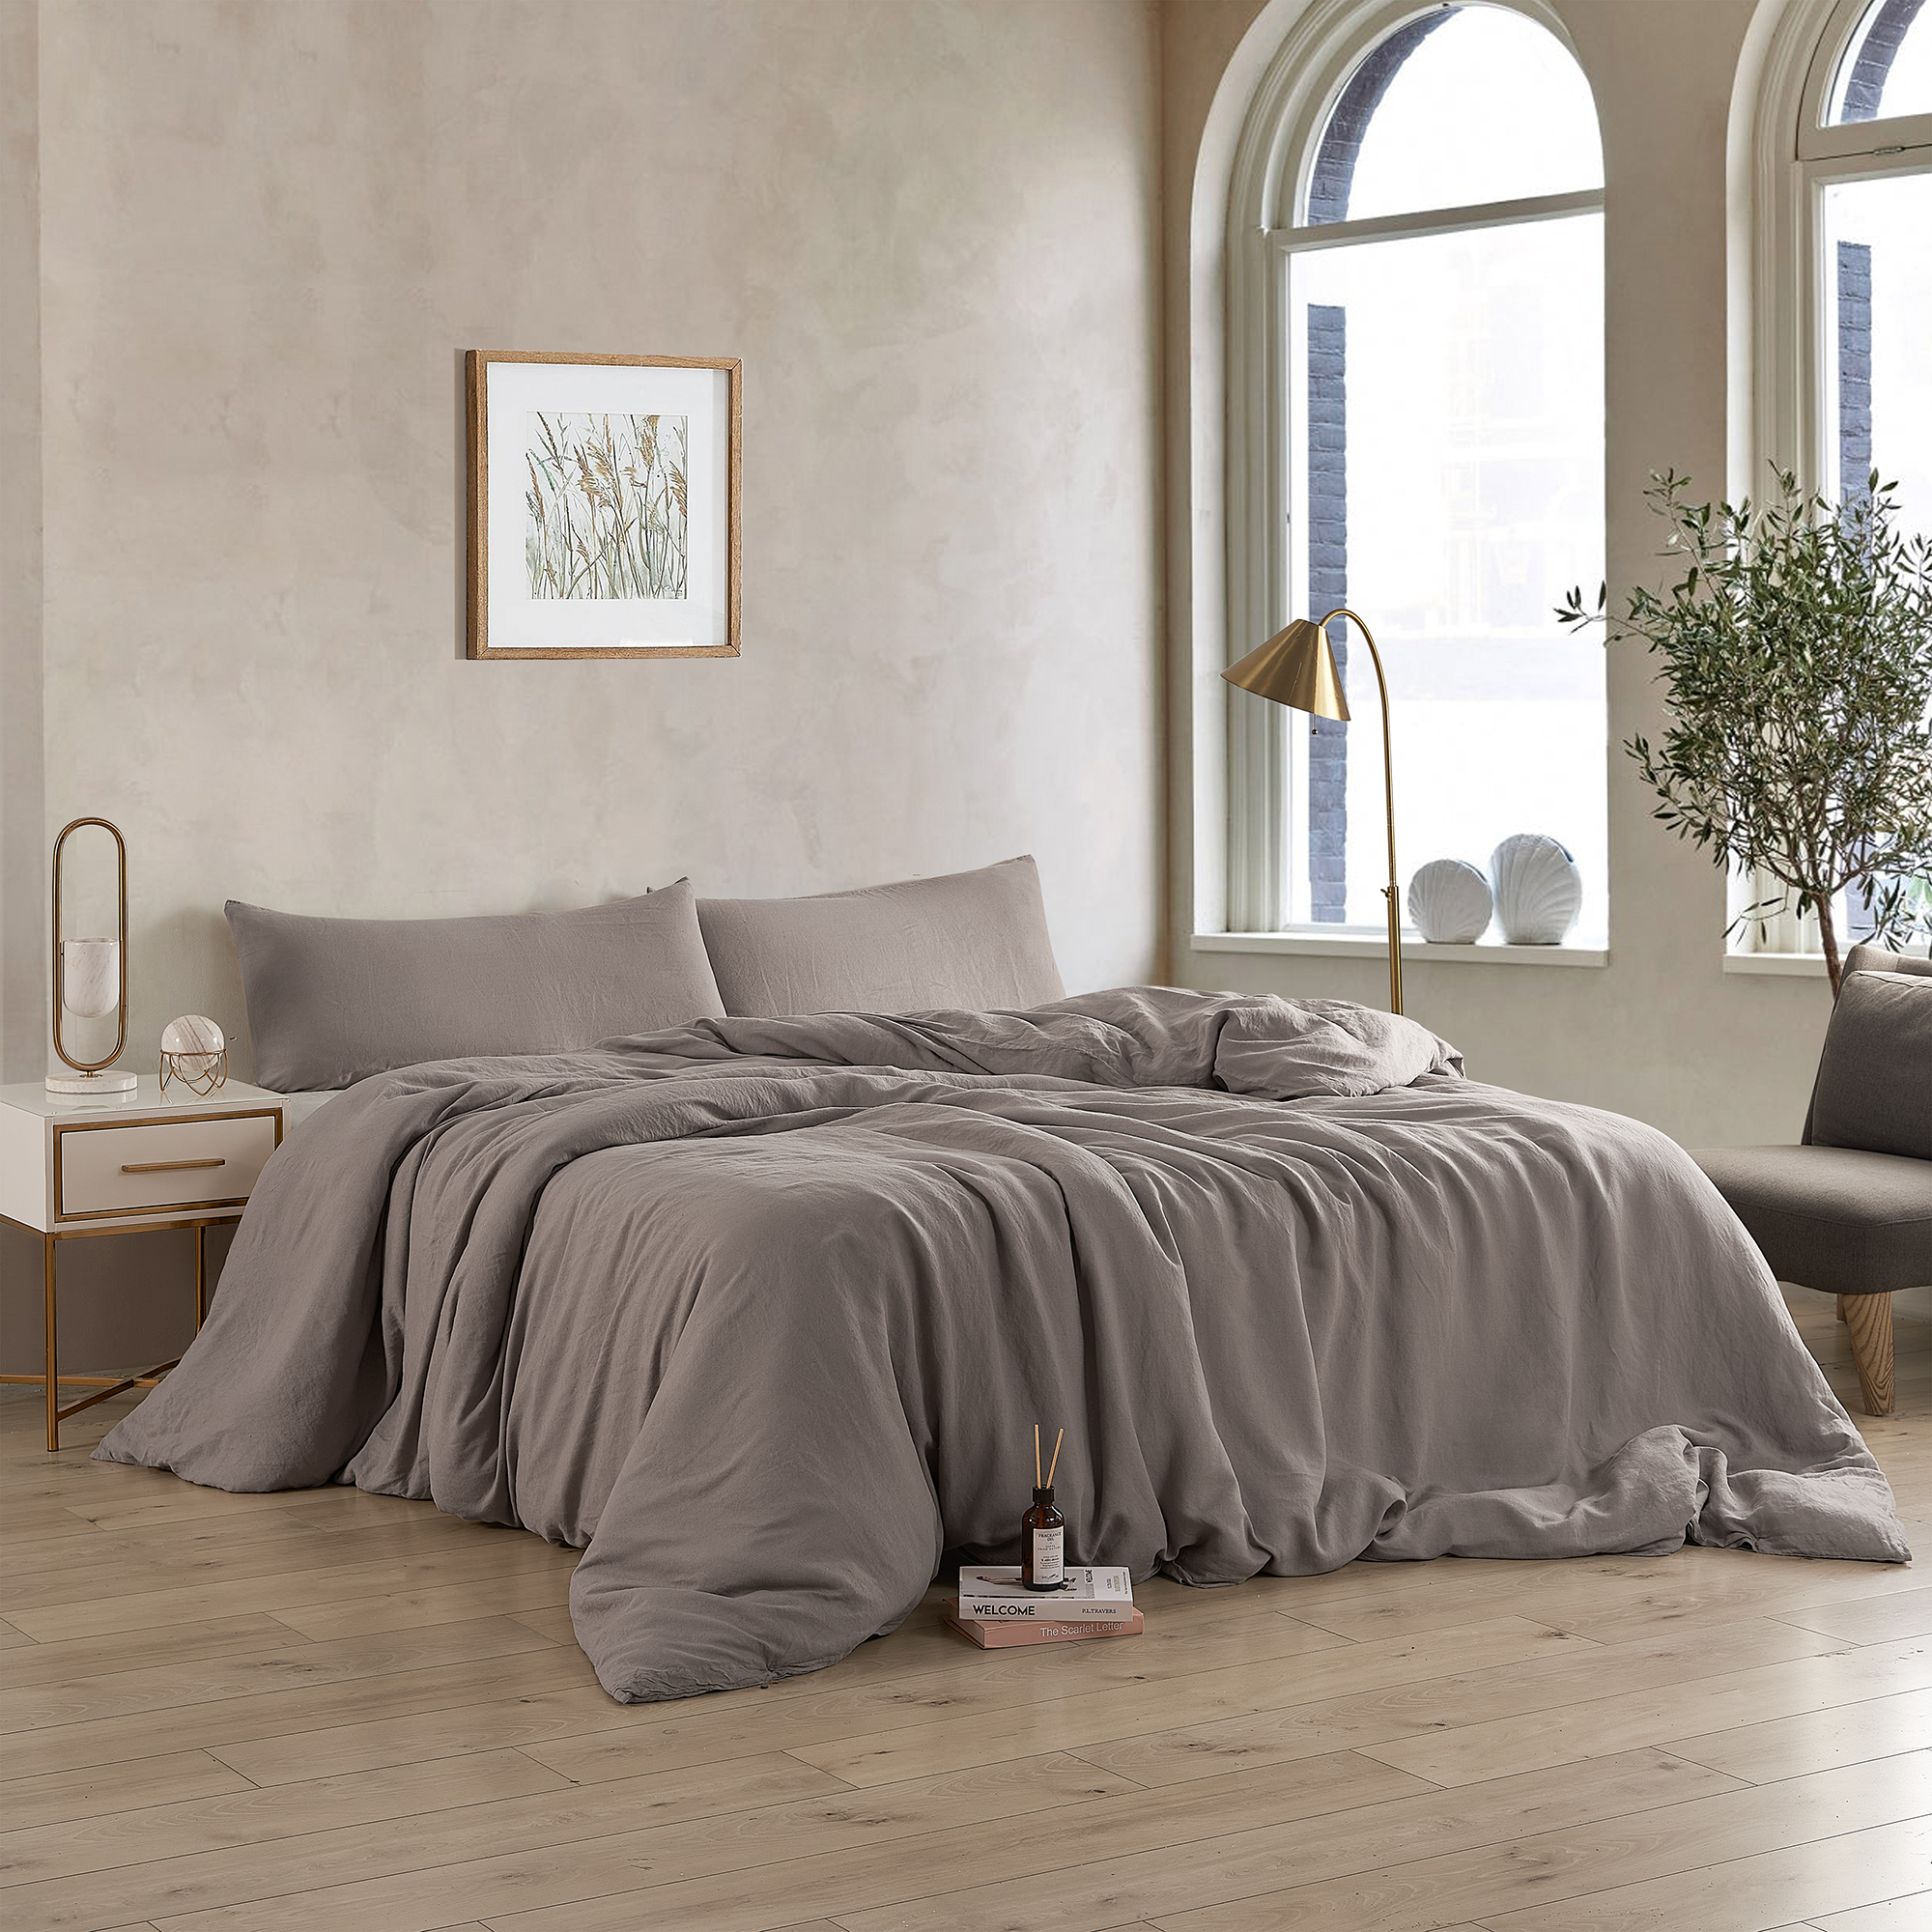 Dark Sky Reserve - Bamboo Linen Twin XL Duvet Cover - Portugal Made - Driftwood Taupe